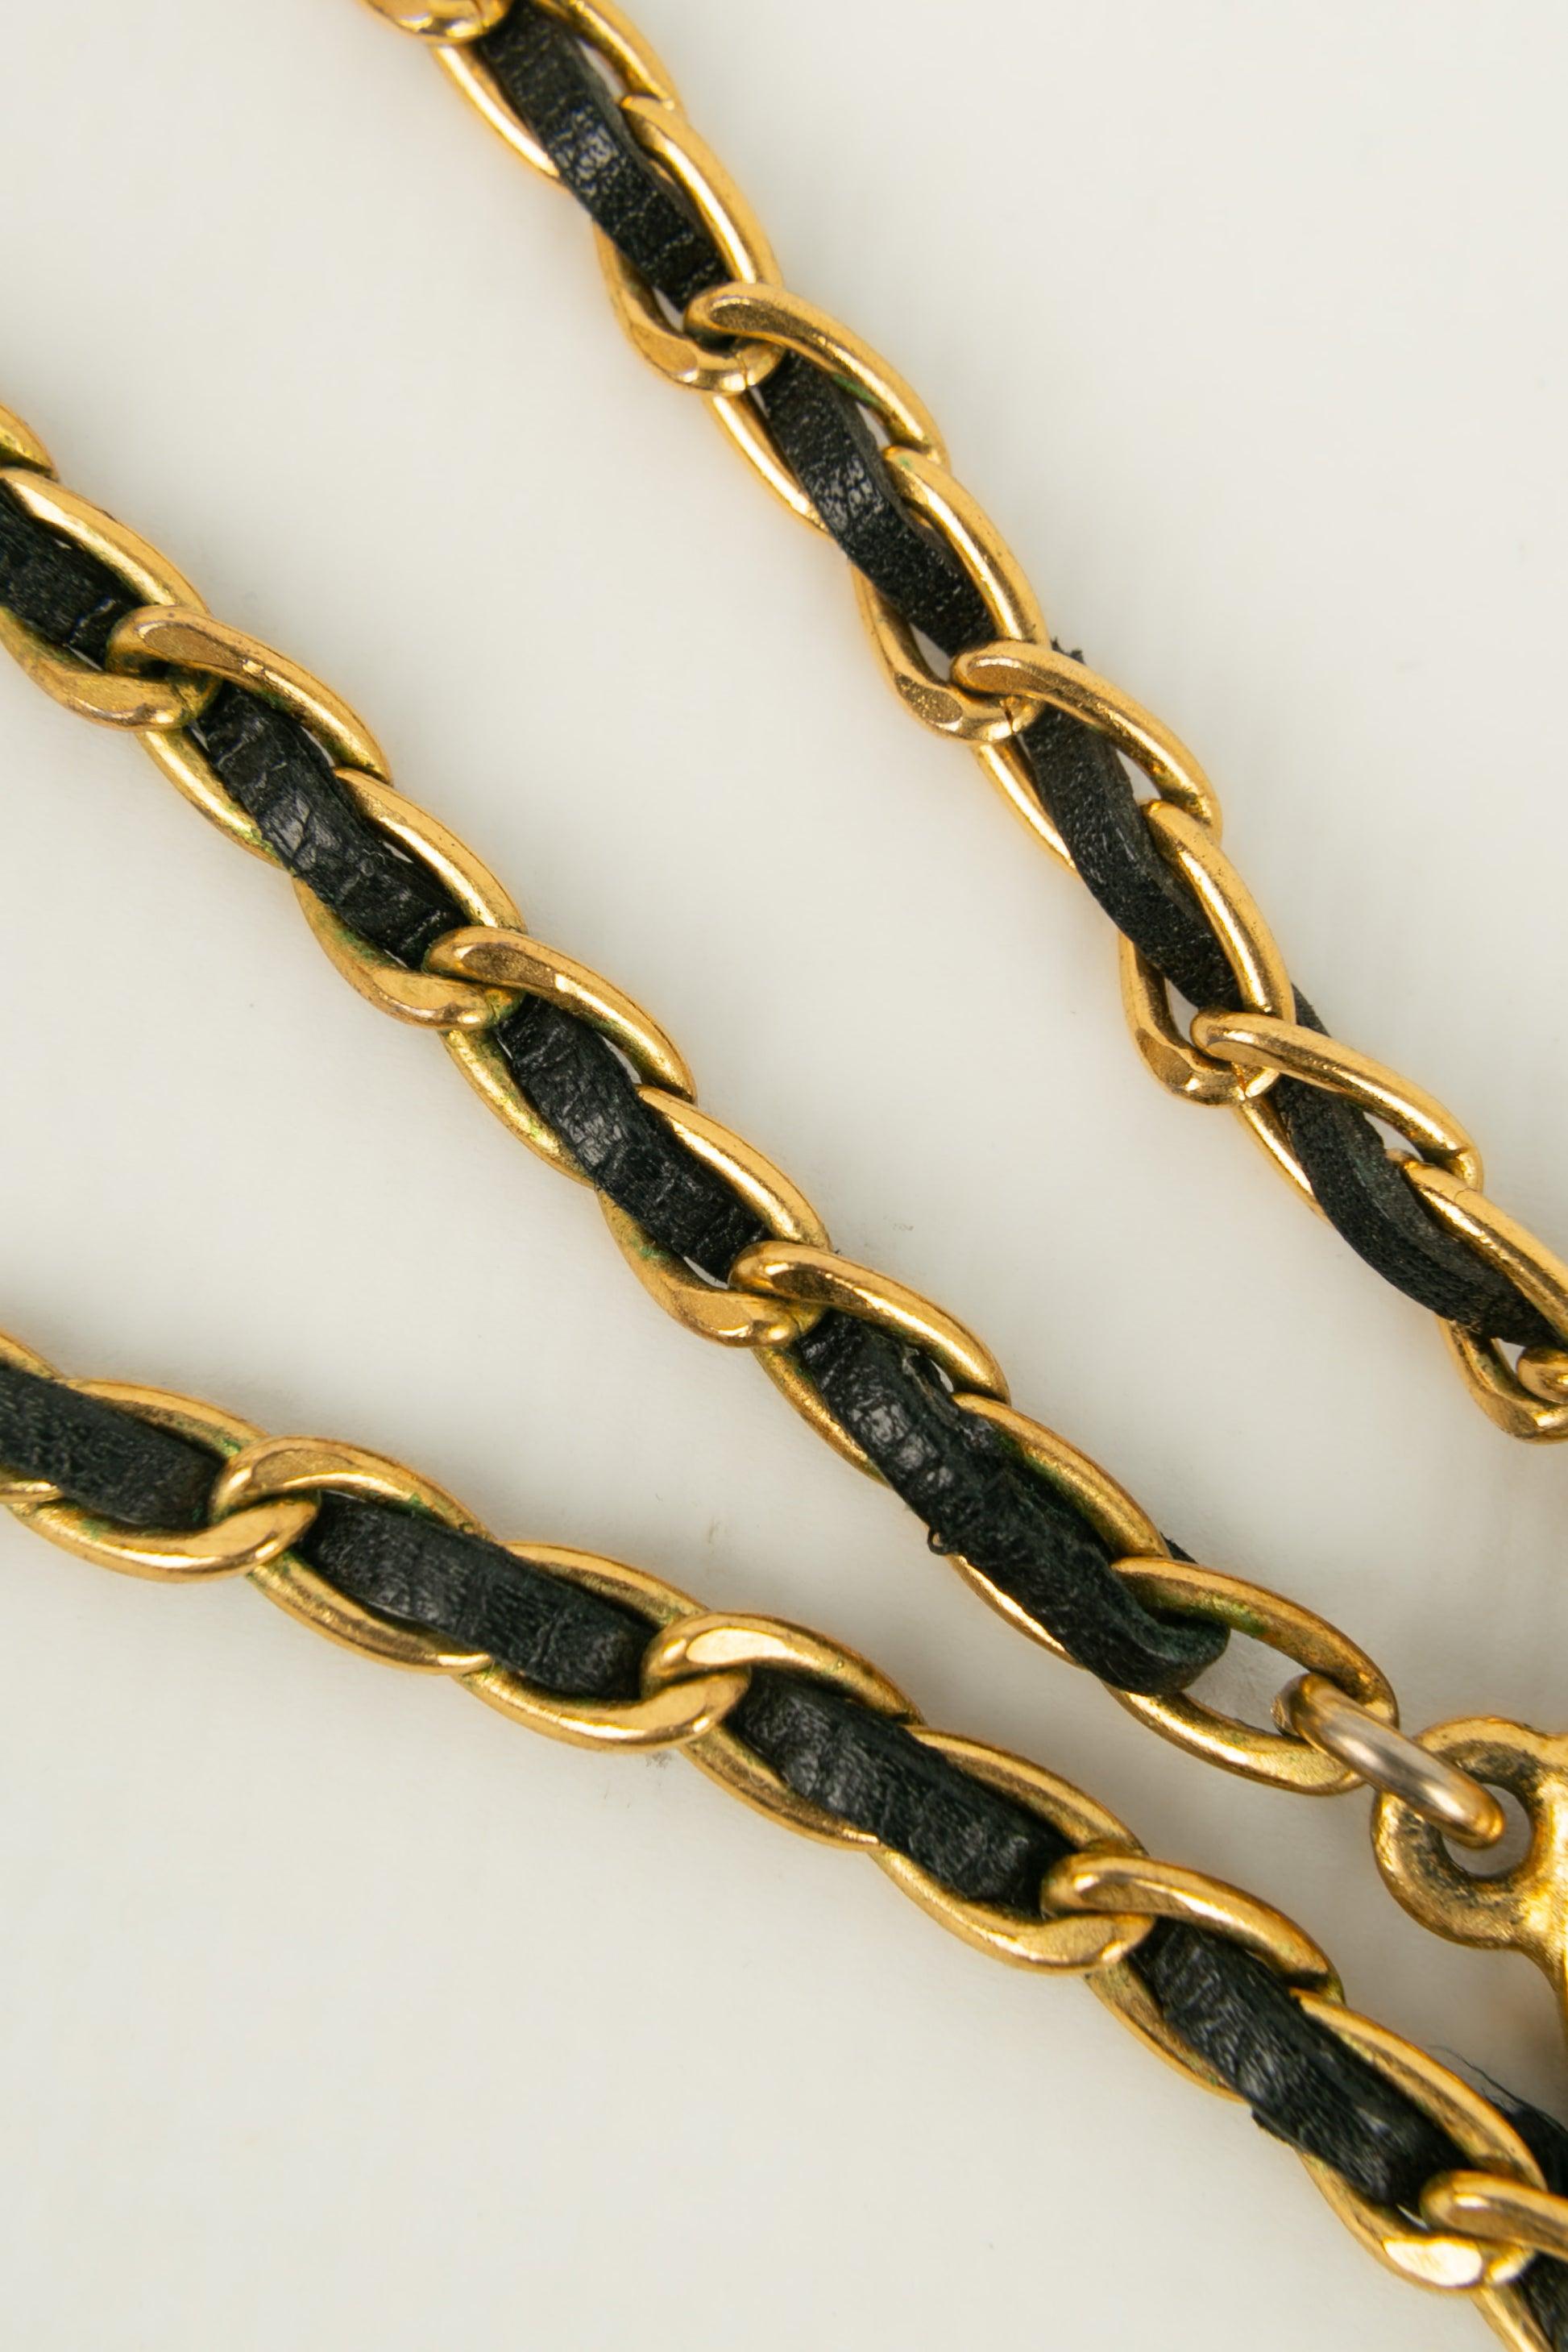 Chanel Necklace / Sautoir in Gold-Plated Metal, 1995 For Sale 5